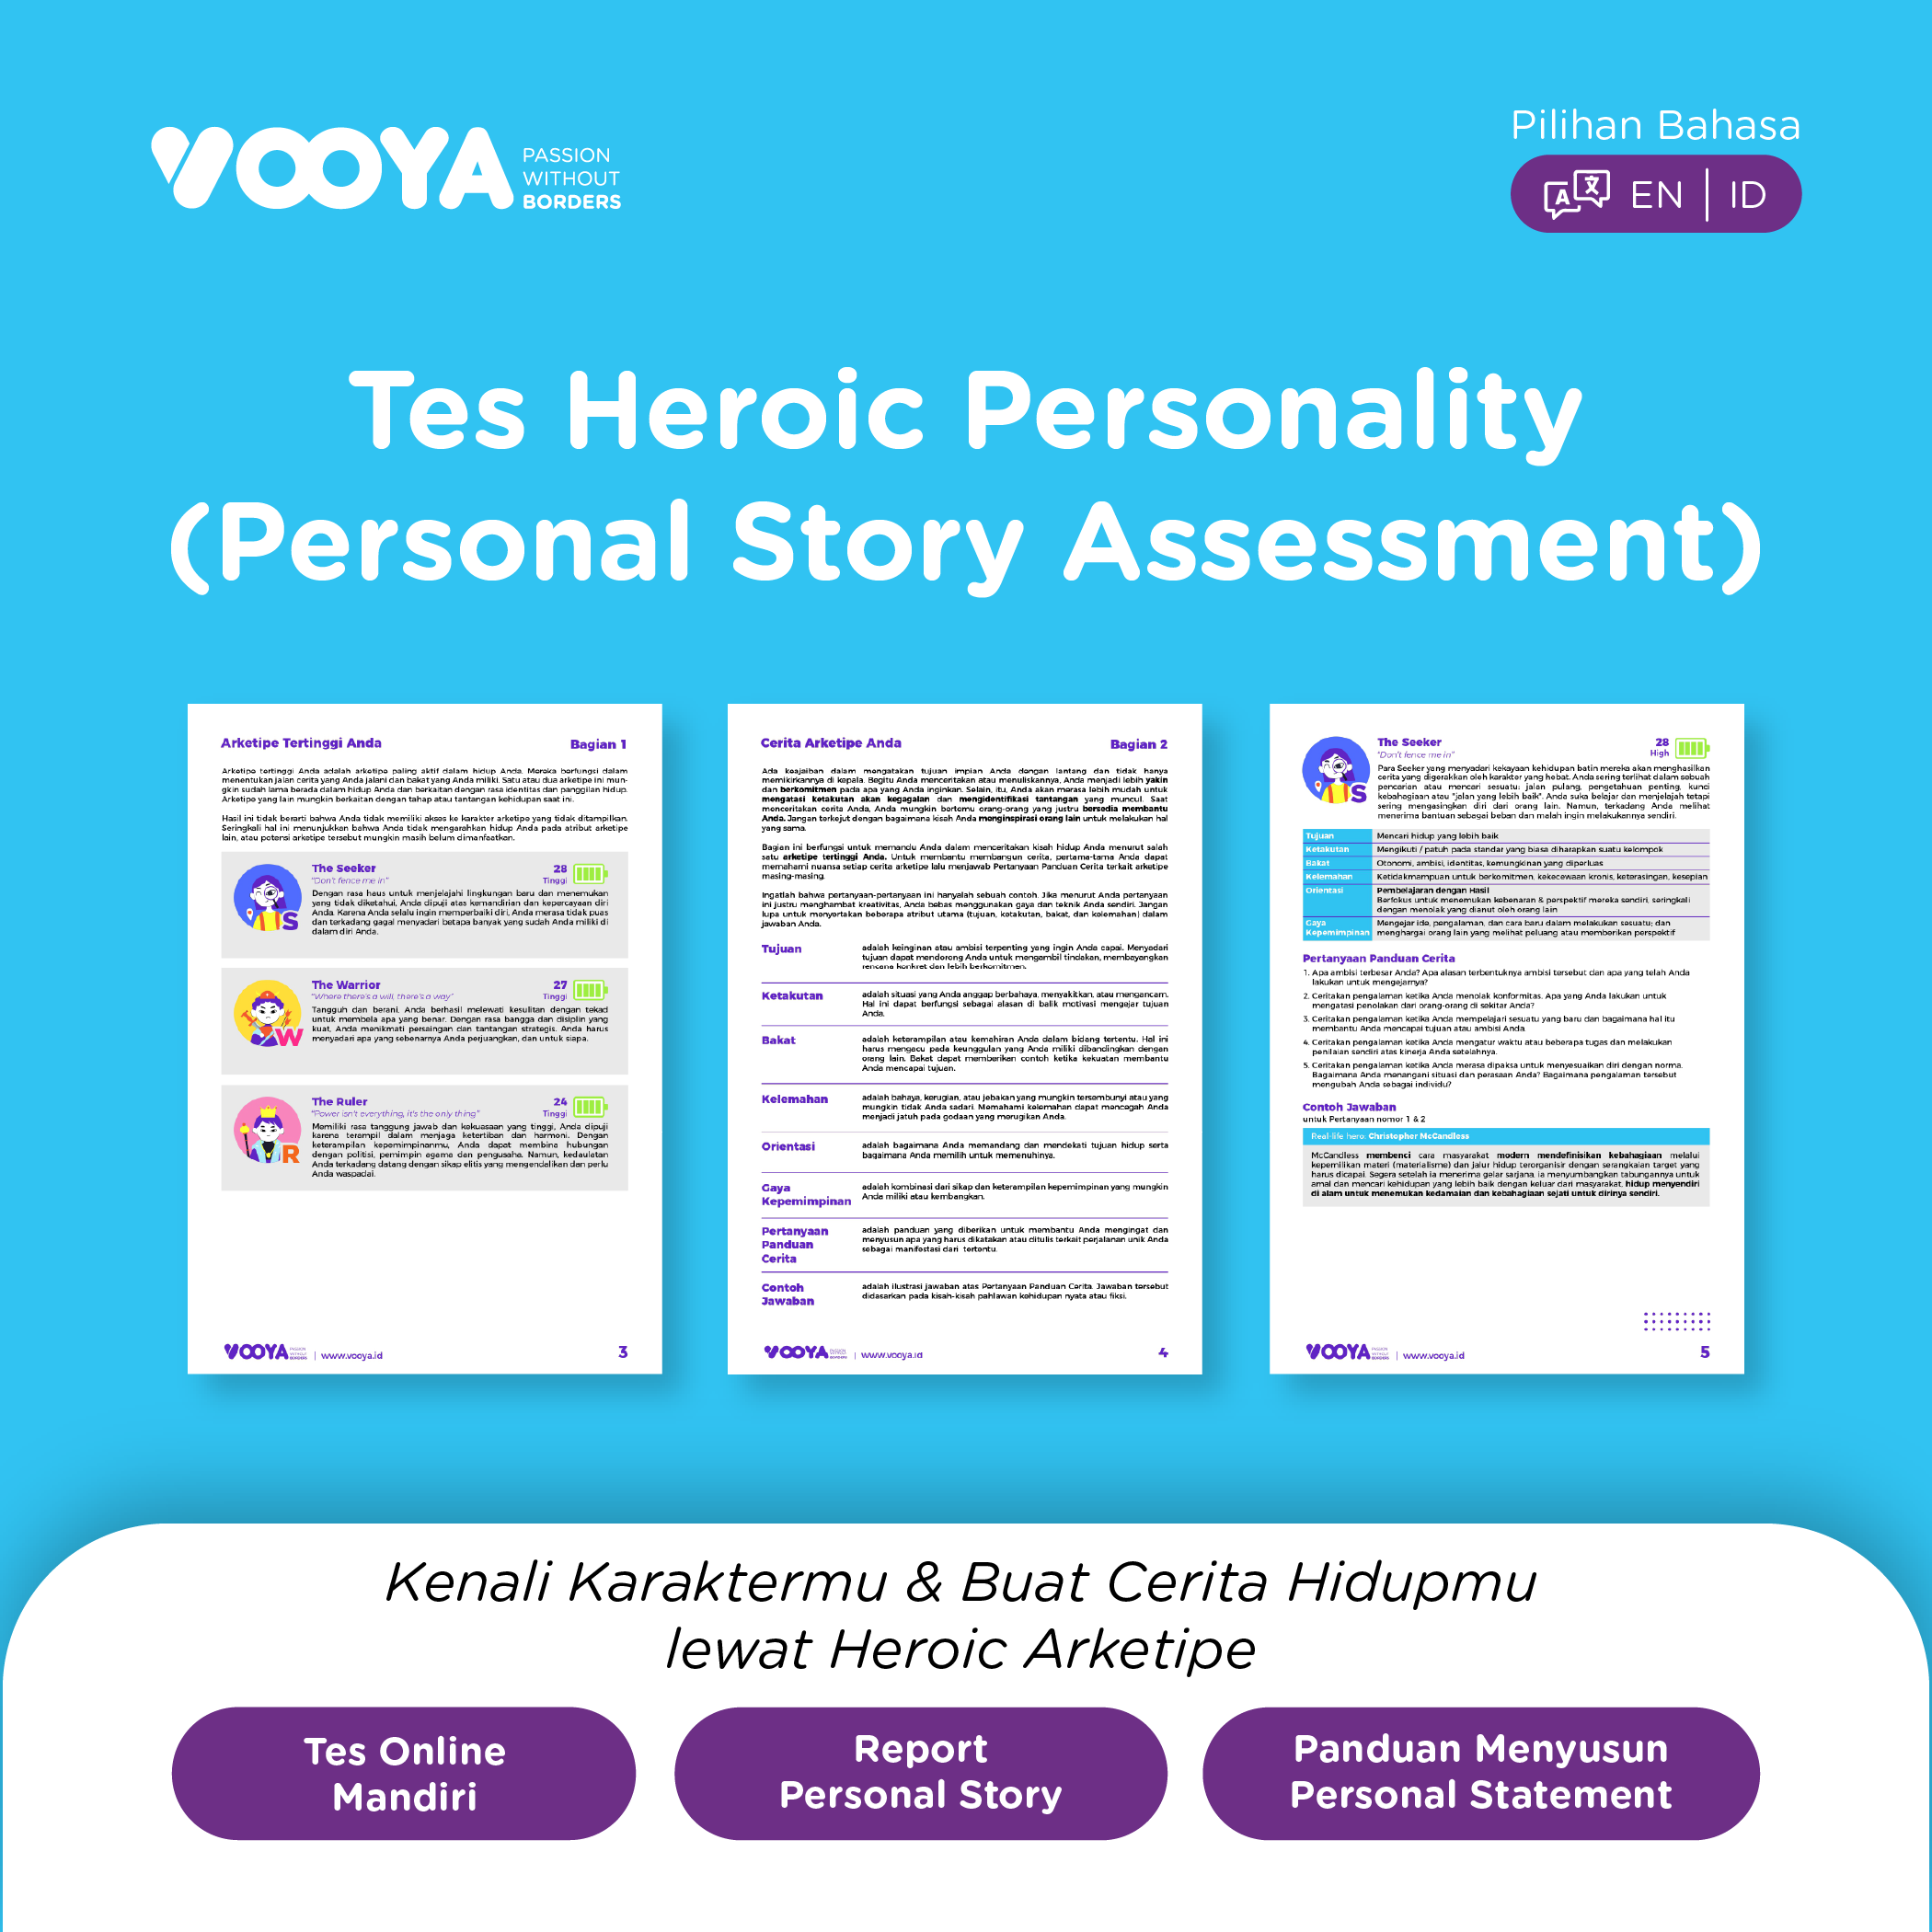 Tes Heroic Personality (Personal Story Assessment)